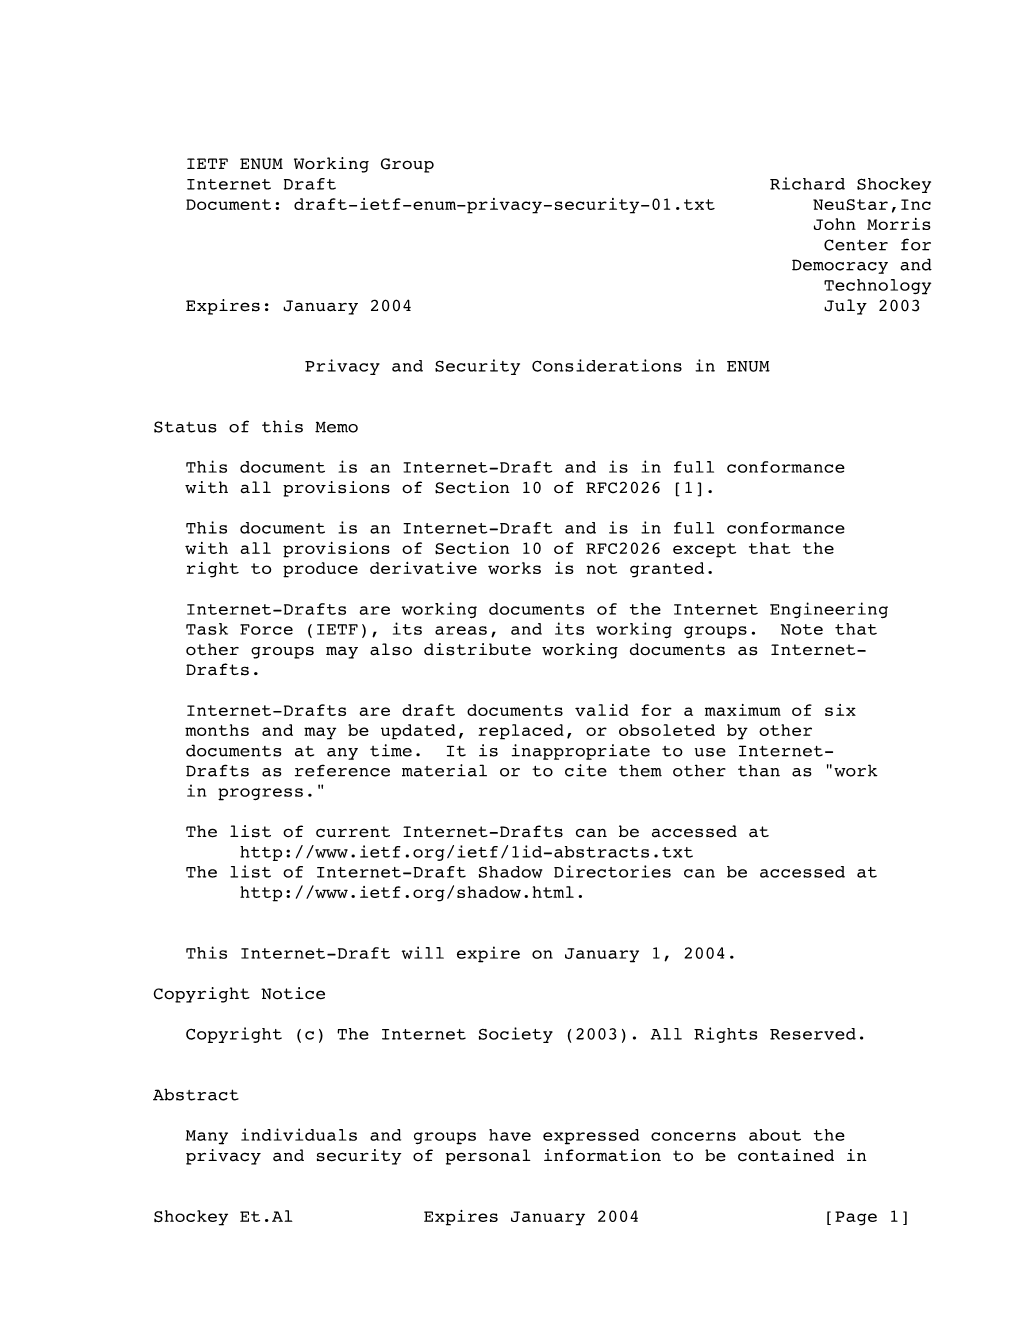 Draft-Ietf-Enum-Privacy-Security-01.Txt Neustar,Inc John Morris Center for Democracy and Technology Expires: January 2004 July 2003